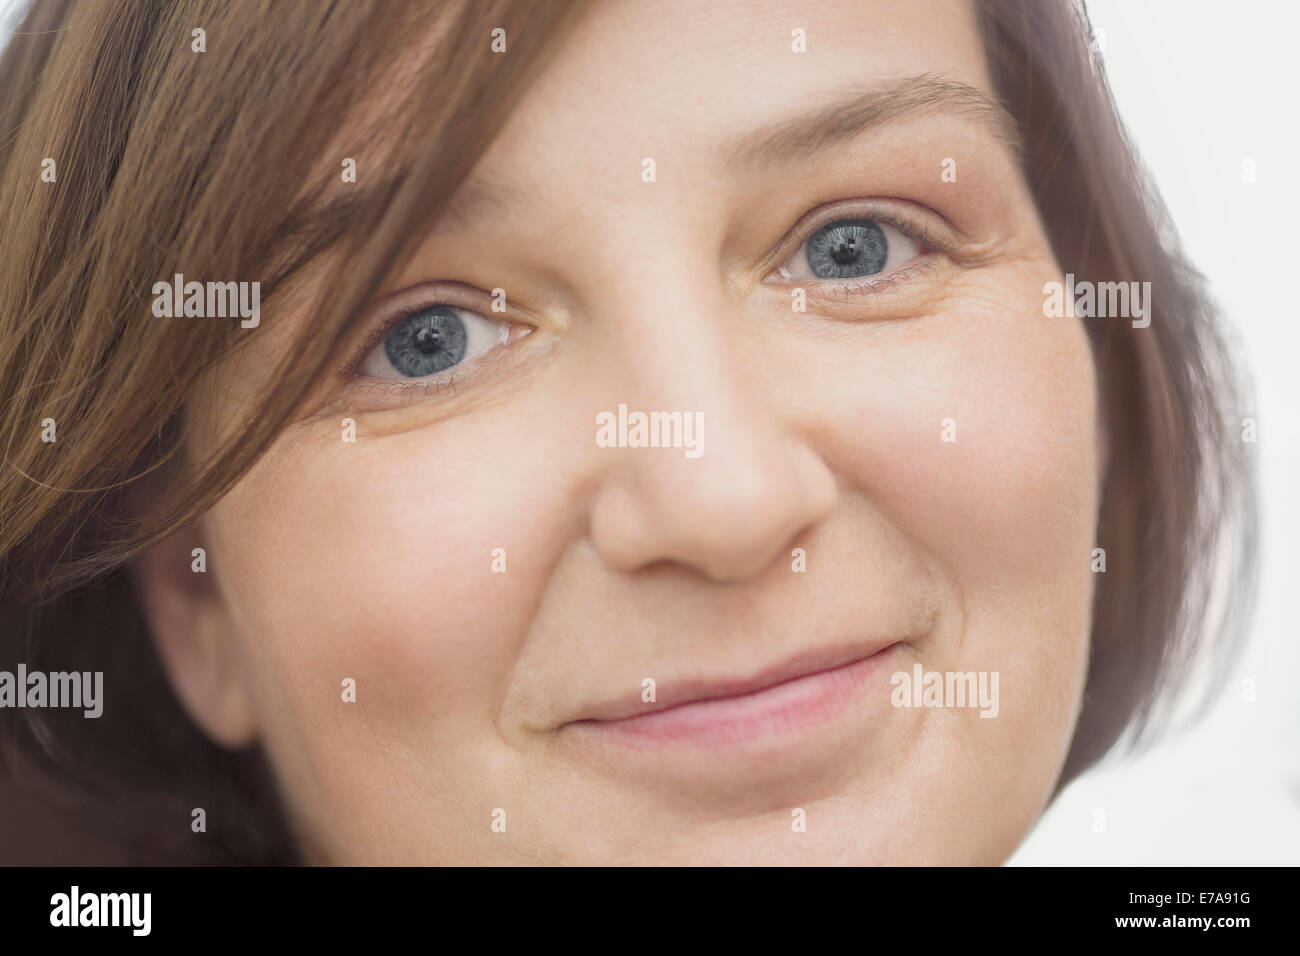 Close-up portrait of happy mature woman over white background Stock Photo